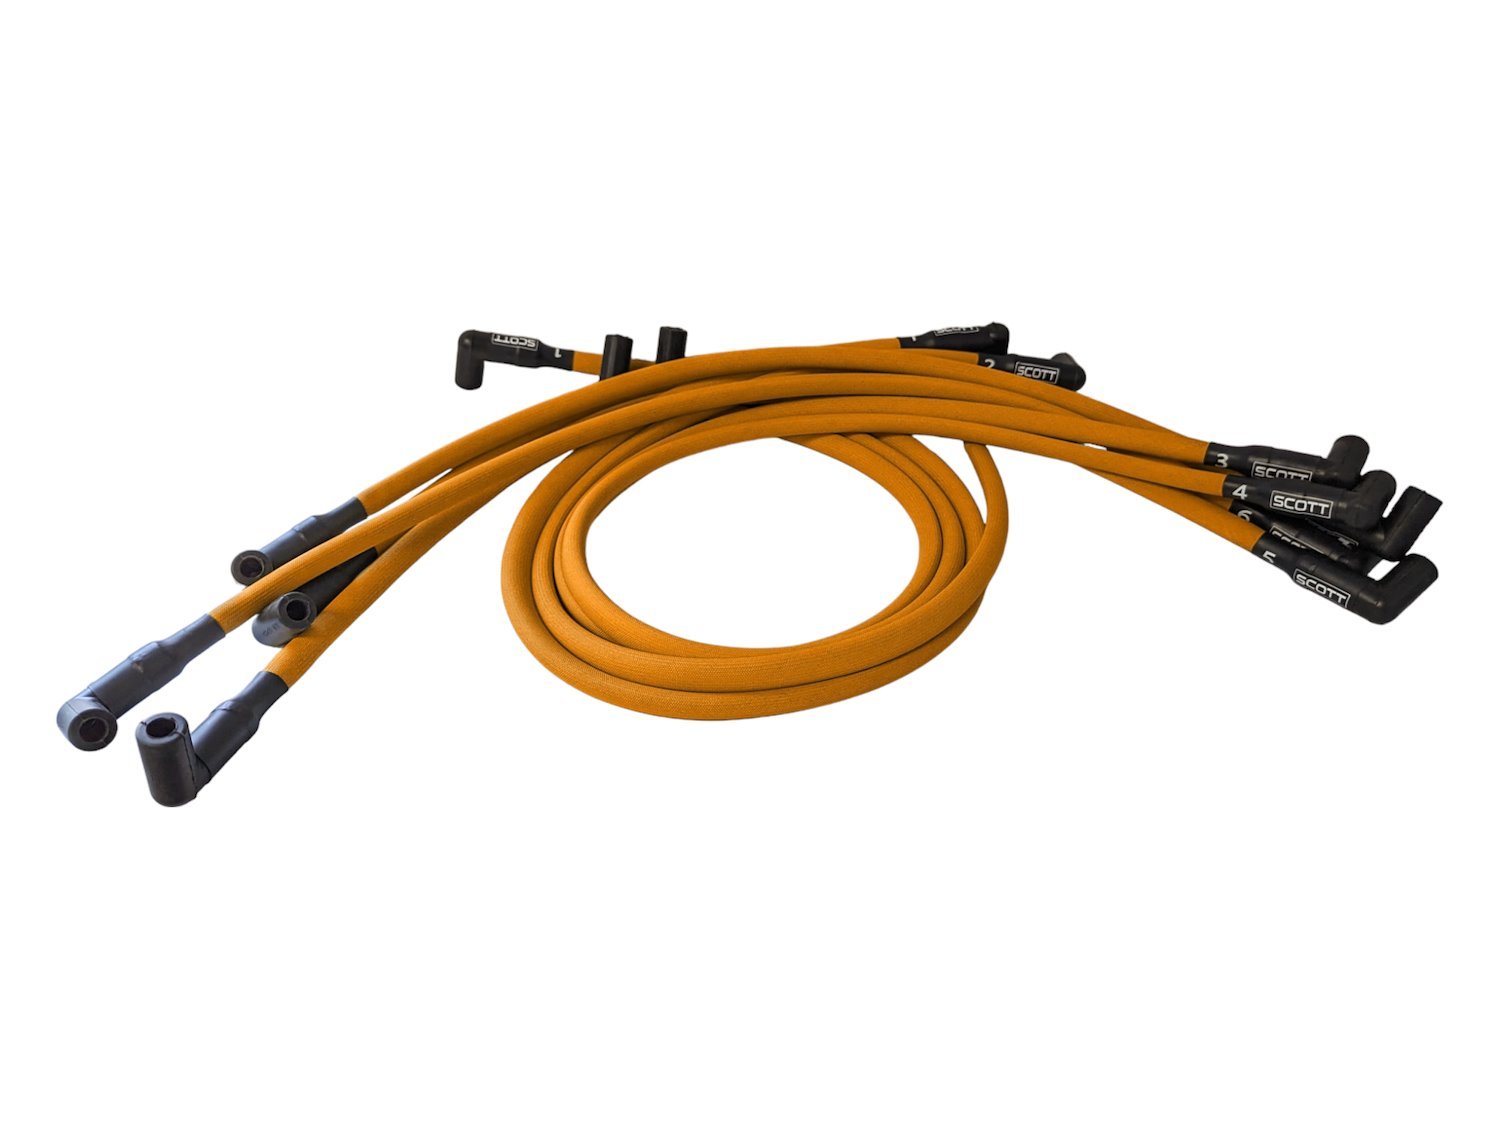 SPW-PS-604-6 High-Performance Fiberglass-Oversleeved Spark Plug Wire Set for Small Block Chevy 604 Crate, Under Header [Orange]